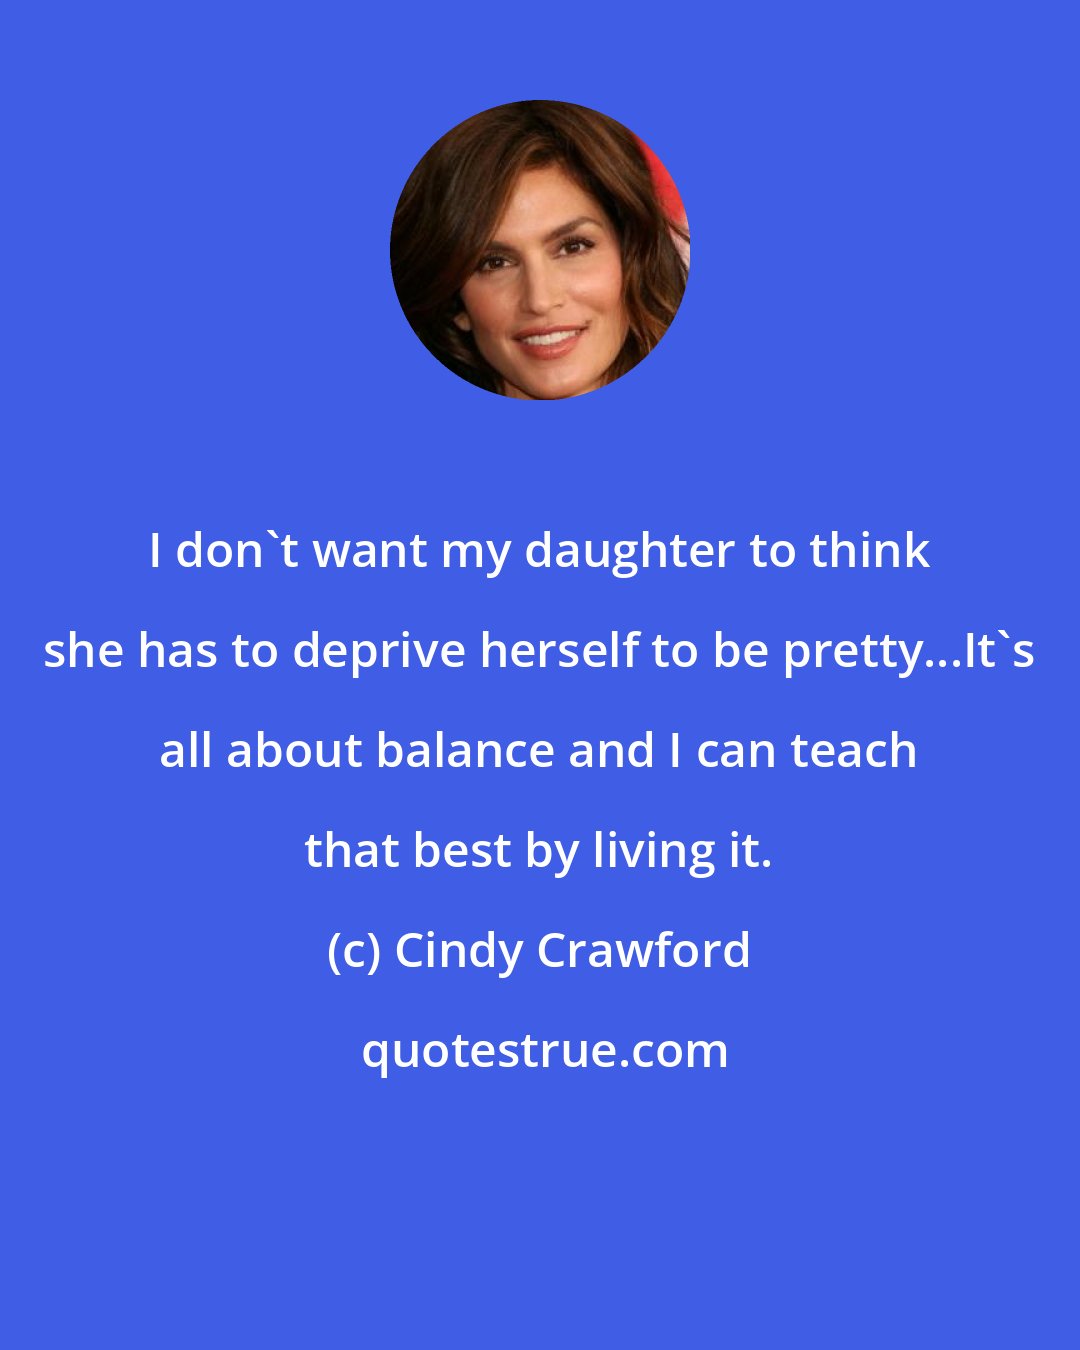 Cindy Crawford: I don't want my daughter to think she has to deprive herself to be pretty...It's all about balance and I can teach that best by living it.